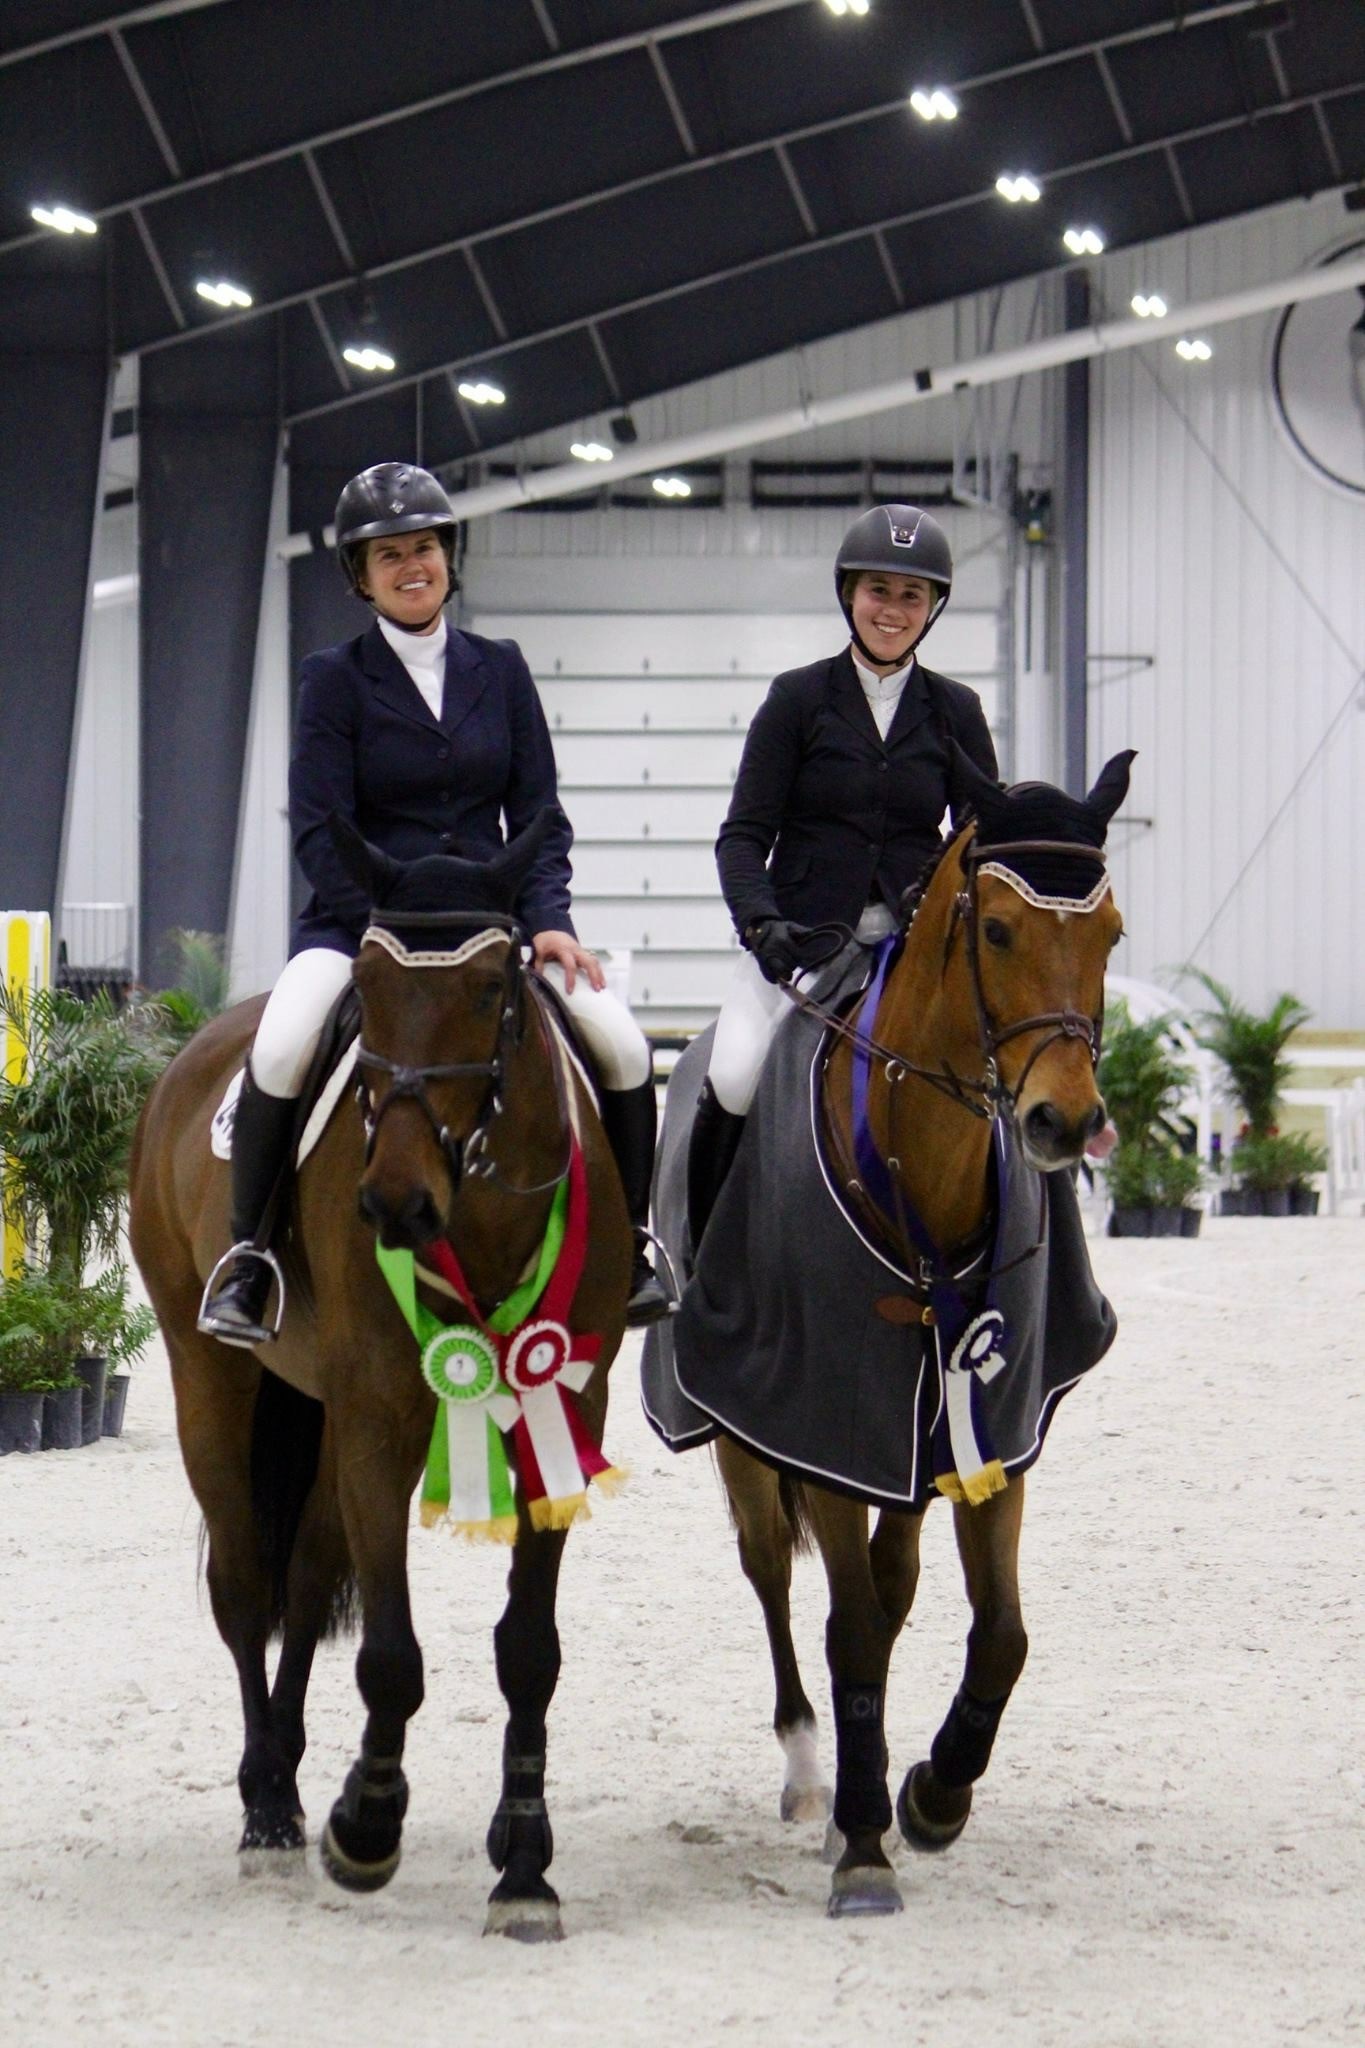 Summer and her horse Johnny (right) celebrating with friends at the WEC. Photo by Samantha Hill